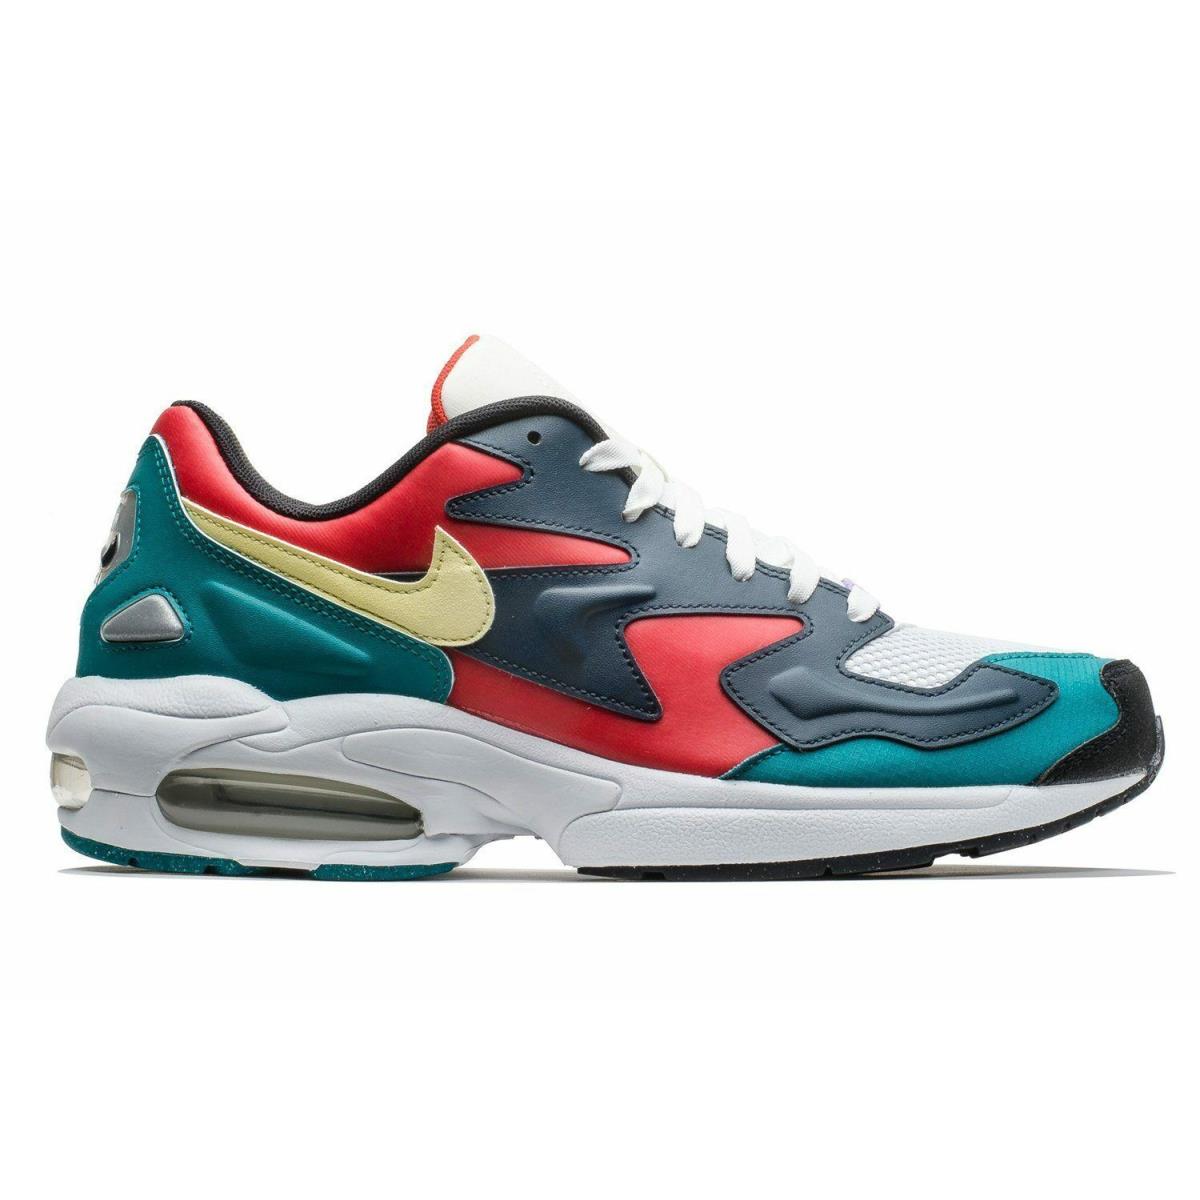 Men`s Nike Air Max 2 Light SP Multi Color Athletic Fashion Casual BV1359 600